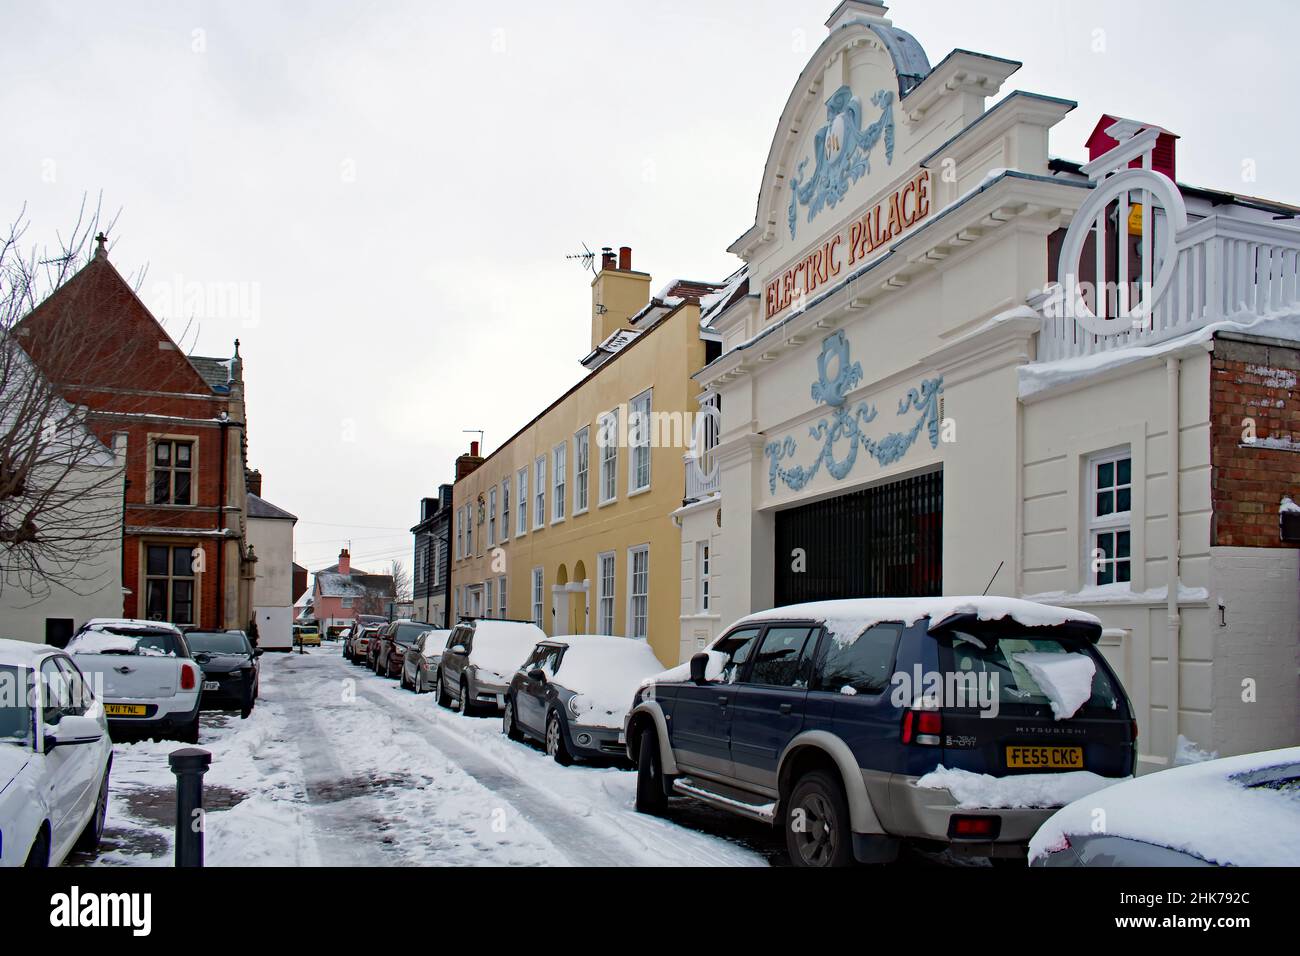 The front facade of the Electric Palace, one of the oldest purpose built surviving cinemas, Harwich, UK. Historic street with parked cars and snow. Stock Photo